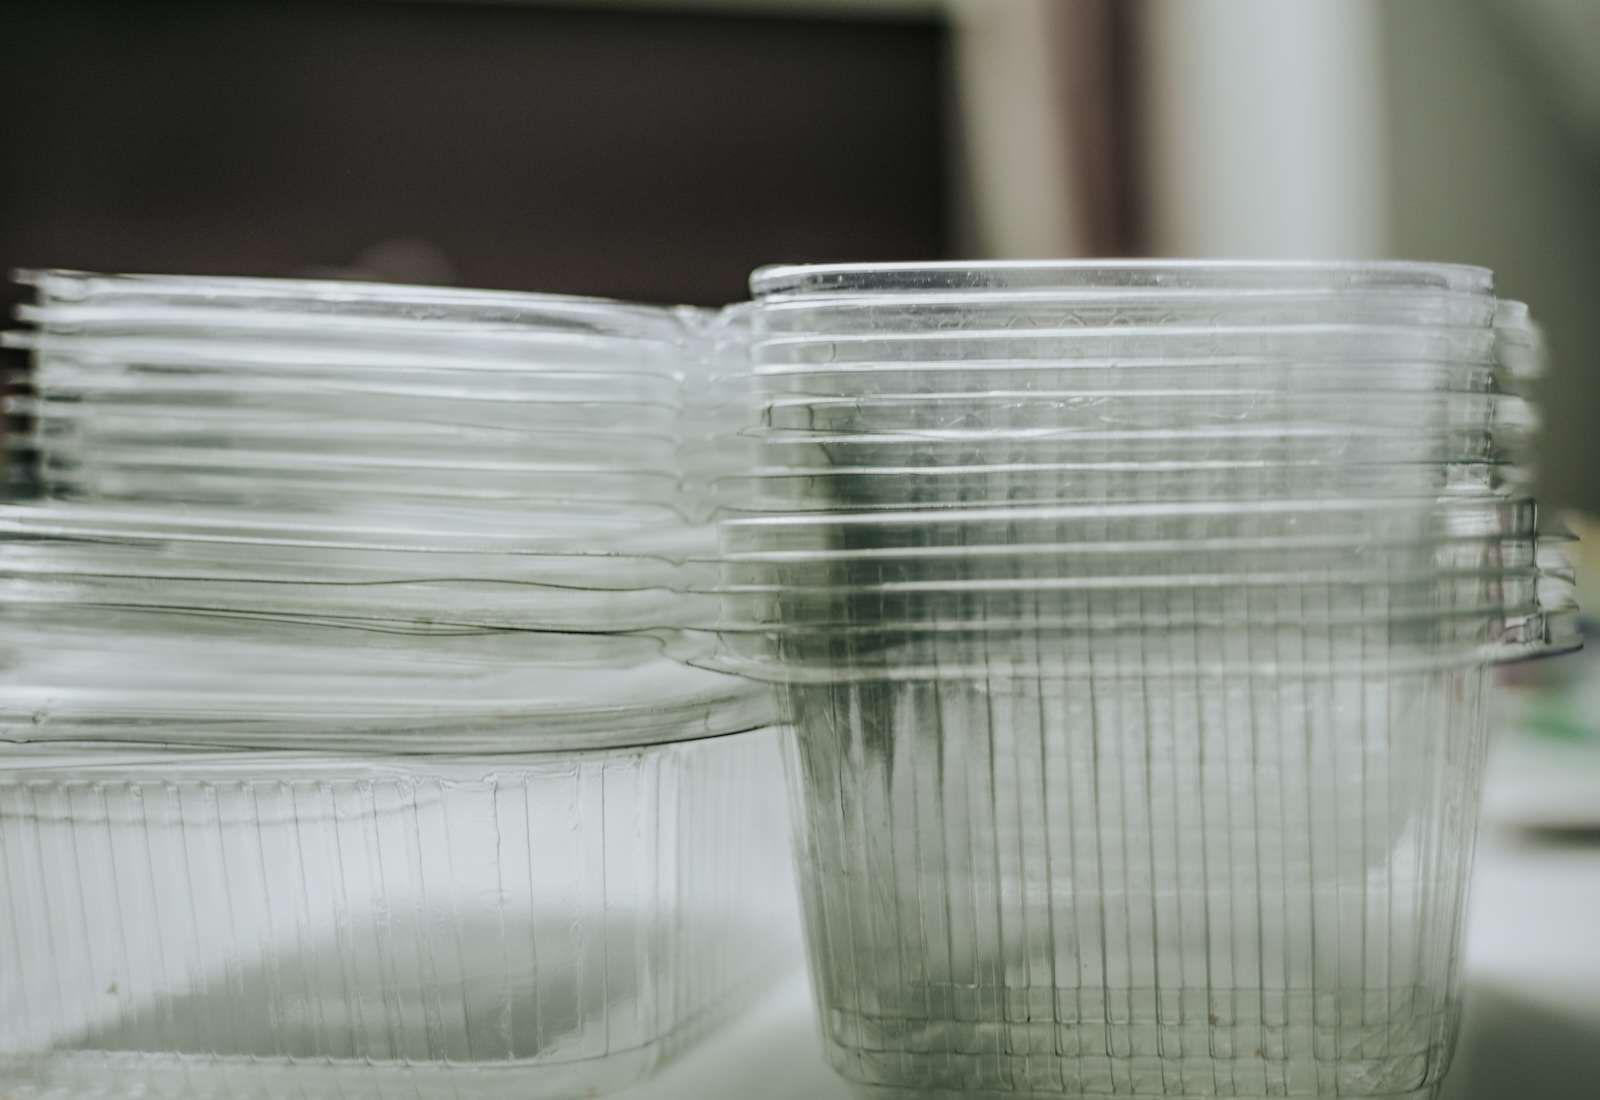 A stack of empty plastic containers on a shelf.